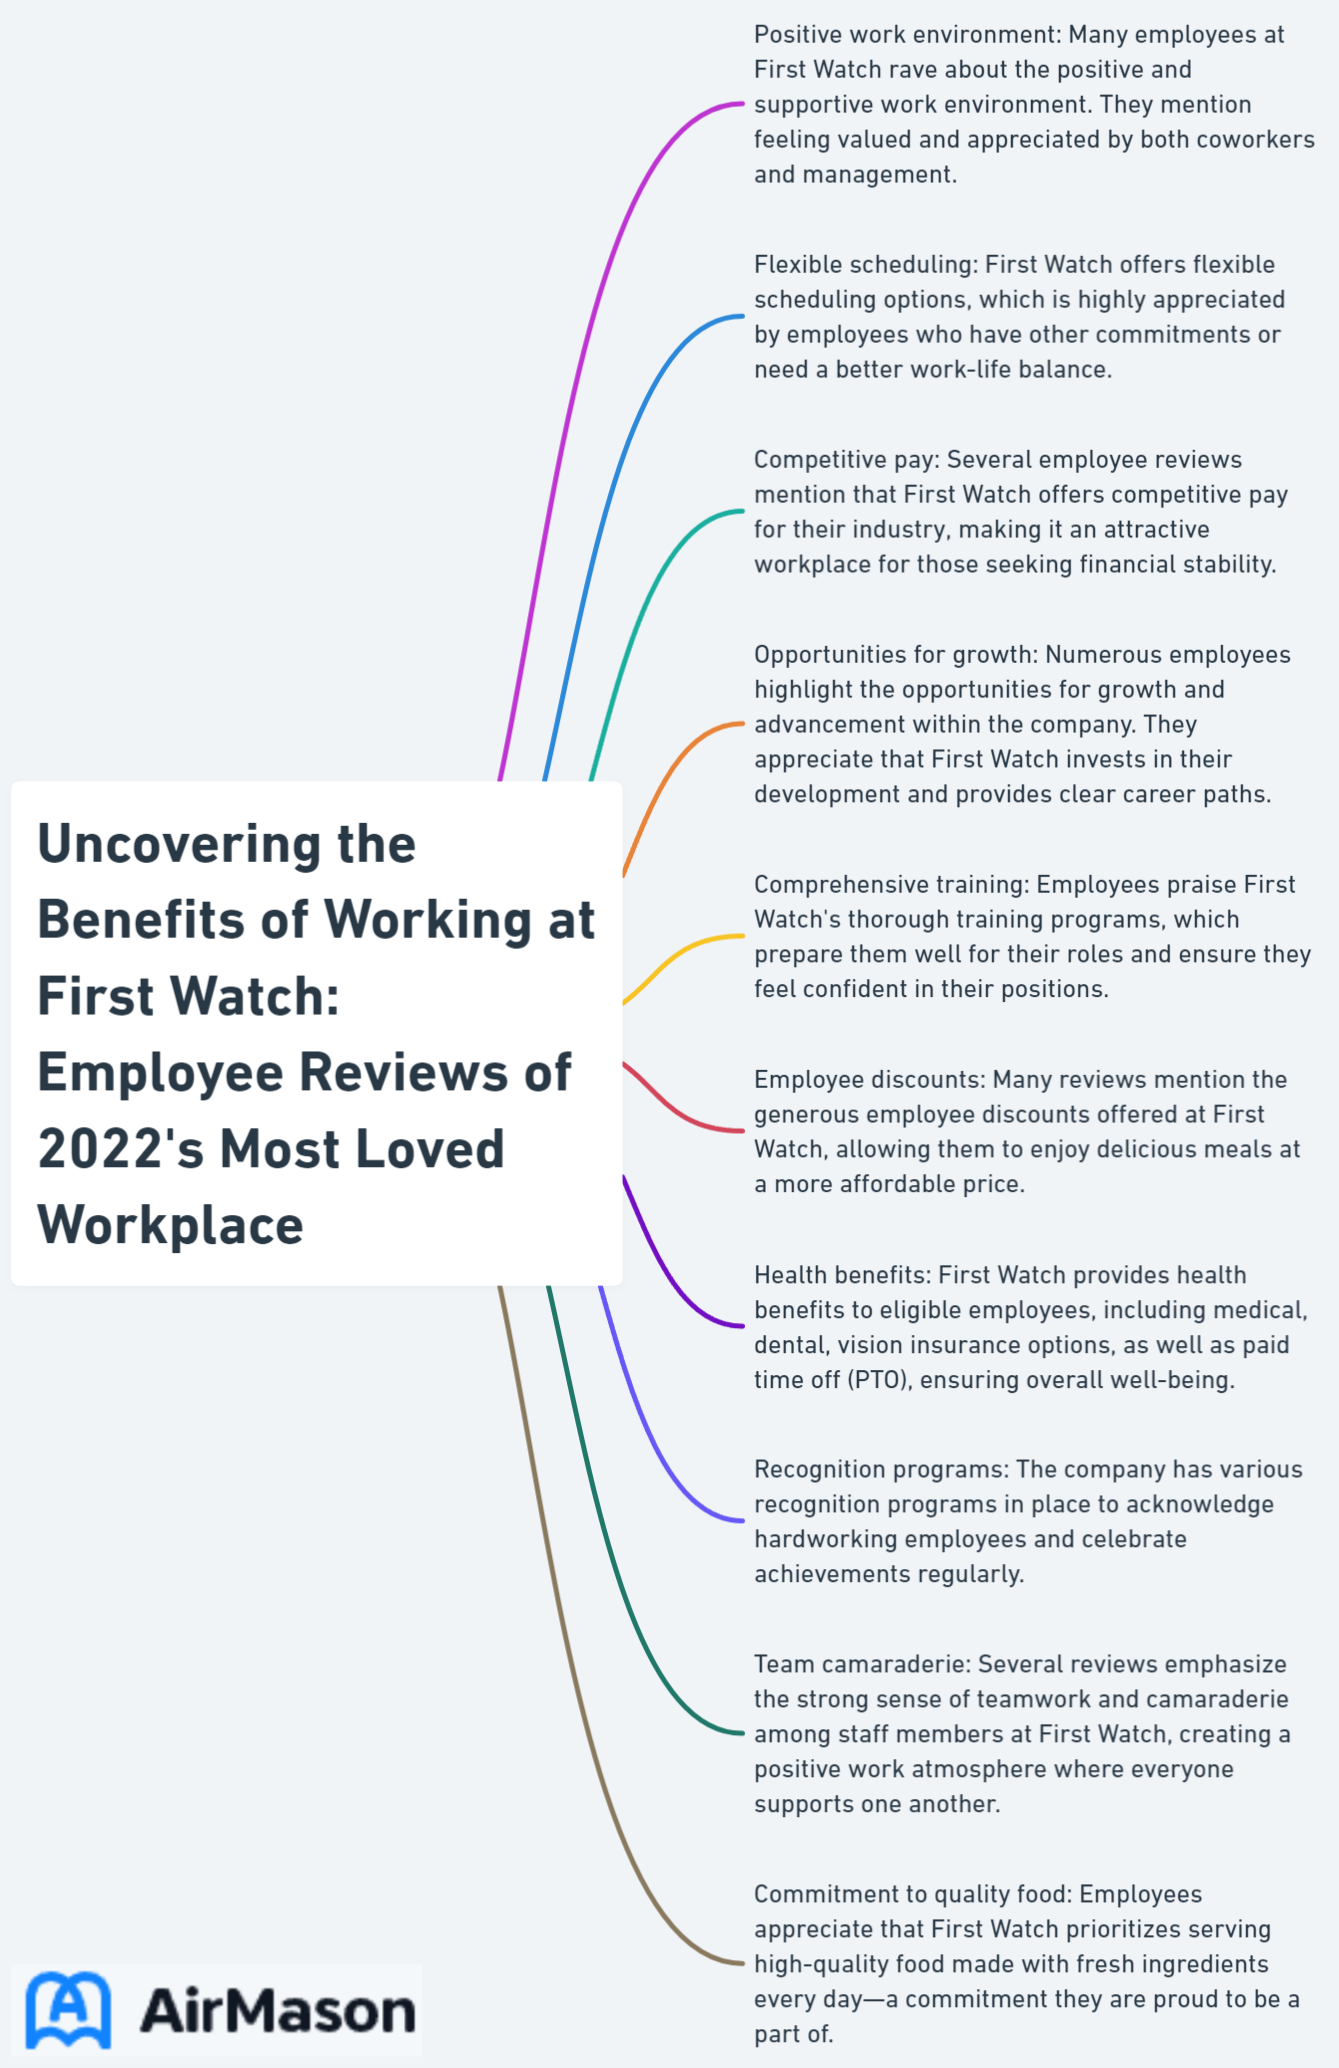 Uncovering the Benefits of Working at First Watch: Employee Reviews of 2022's Most Loved Workplace